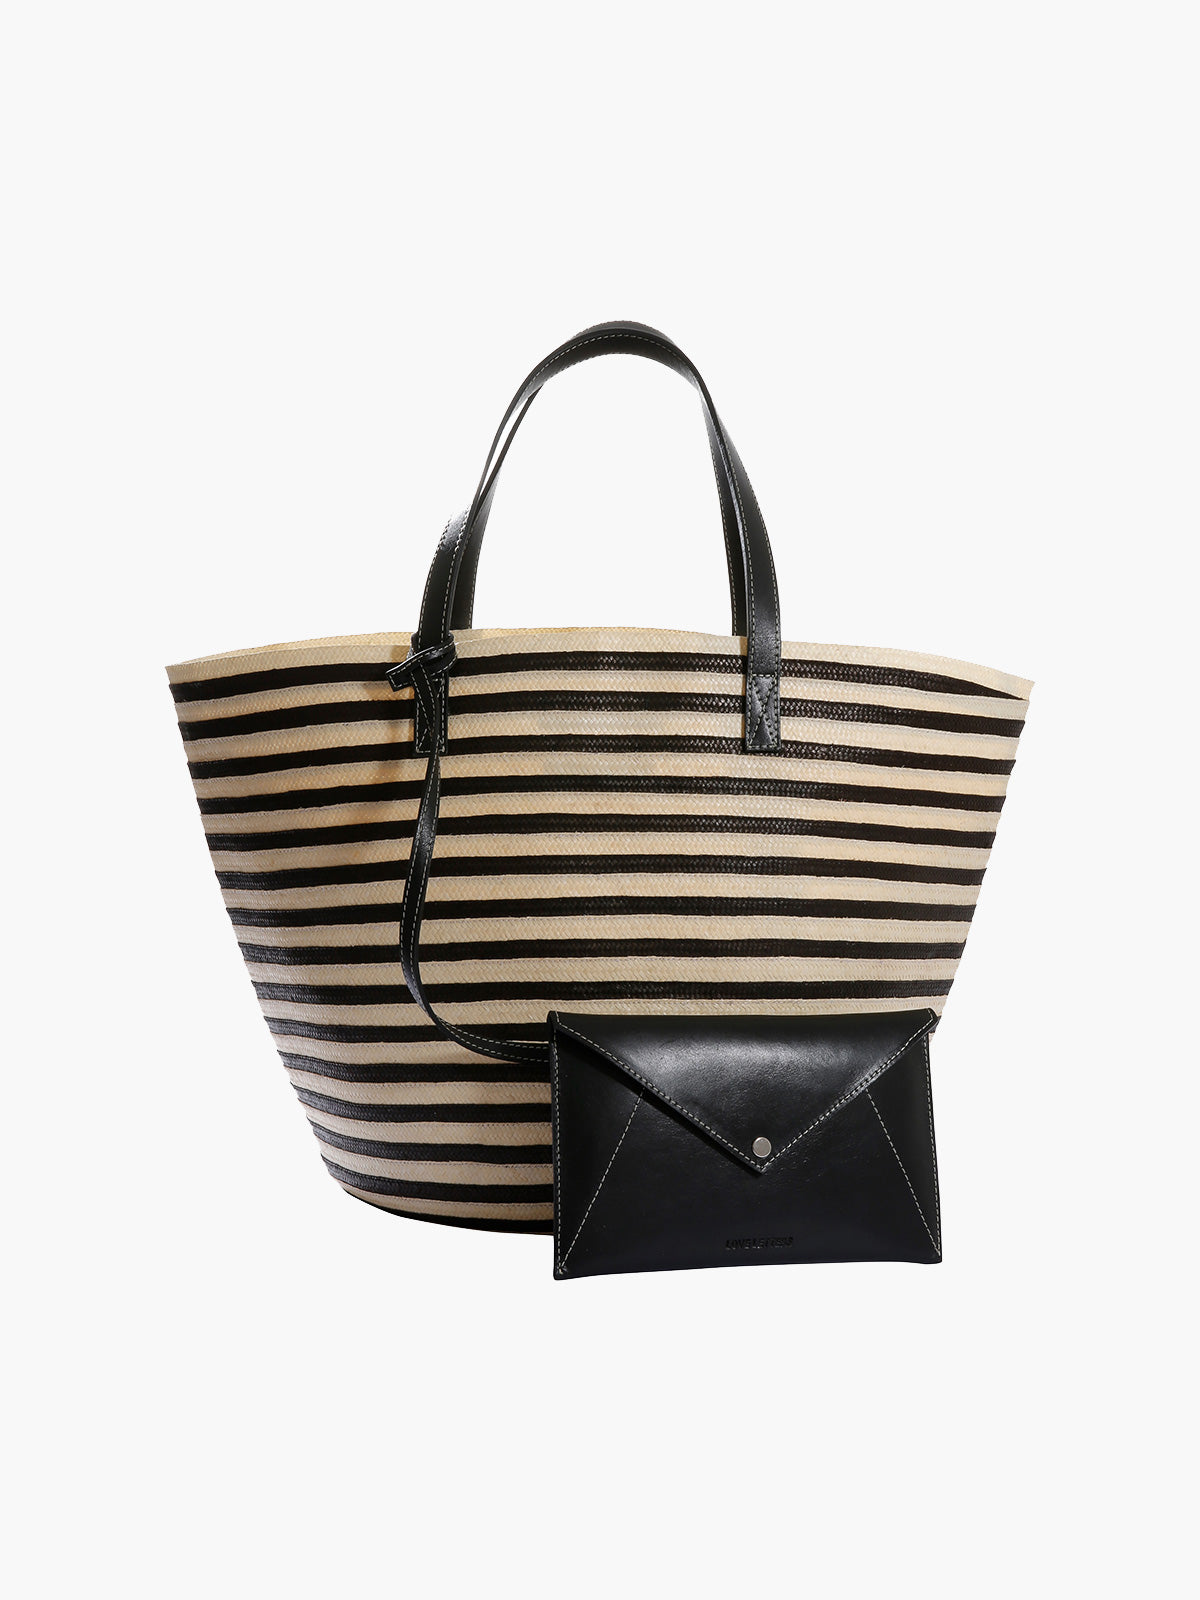 Marcial Handbag in Leather and Cana Flecha | Black Stripes Marcial Handbag in Leather and Cana Flecha | Black Stripes